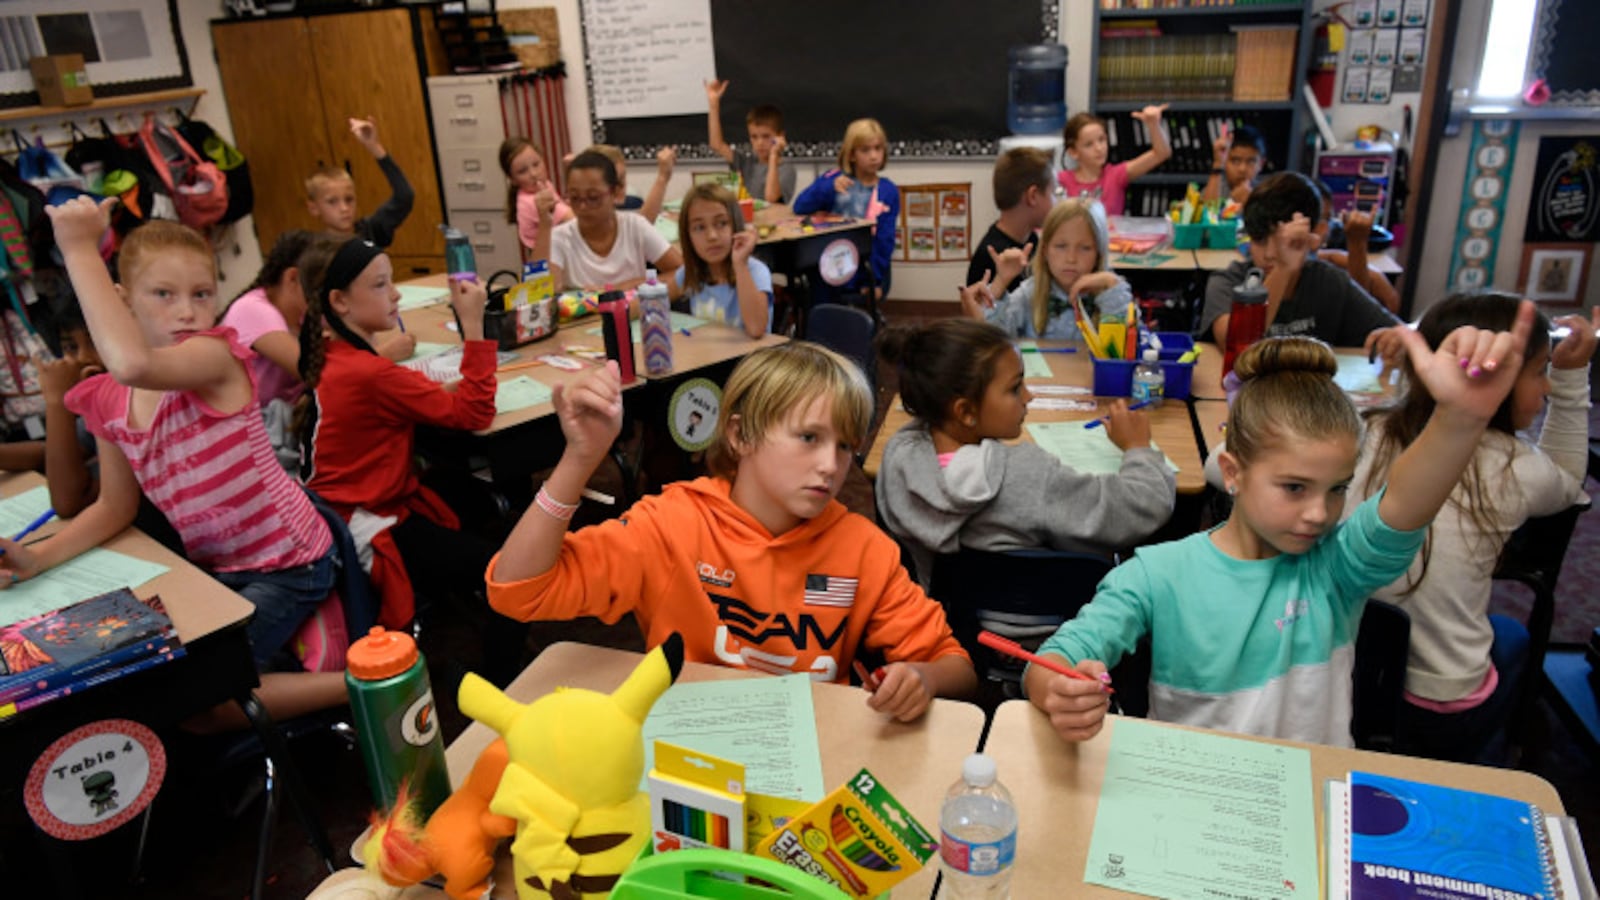 Students pack in Jennifer Hetrick's 4th grade classroom, in a temporary modular “cabin” building at Meridian Elementary in the Adams 12 district. (Photo by Andy Cross/The Denver Post)